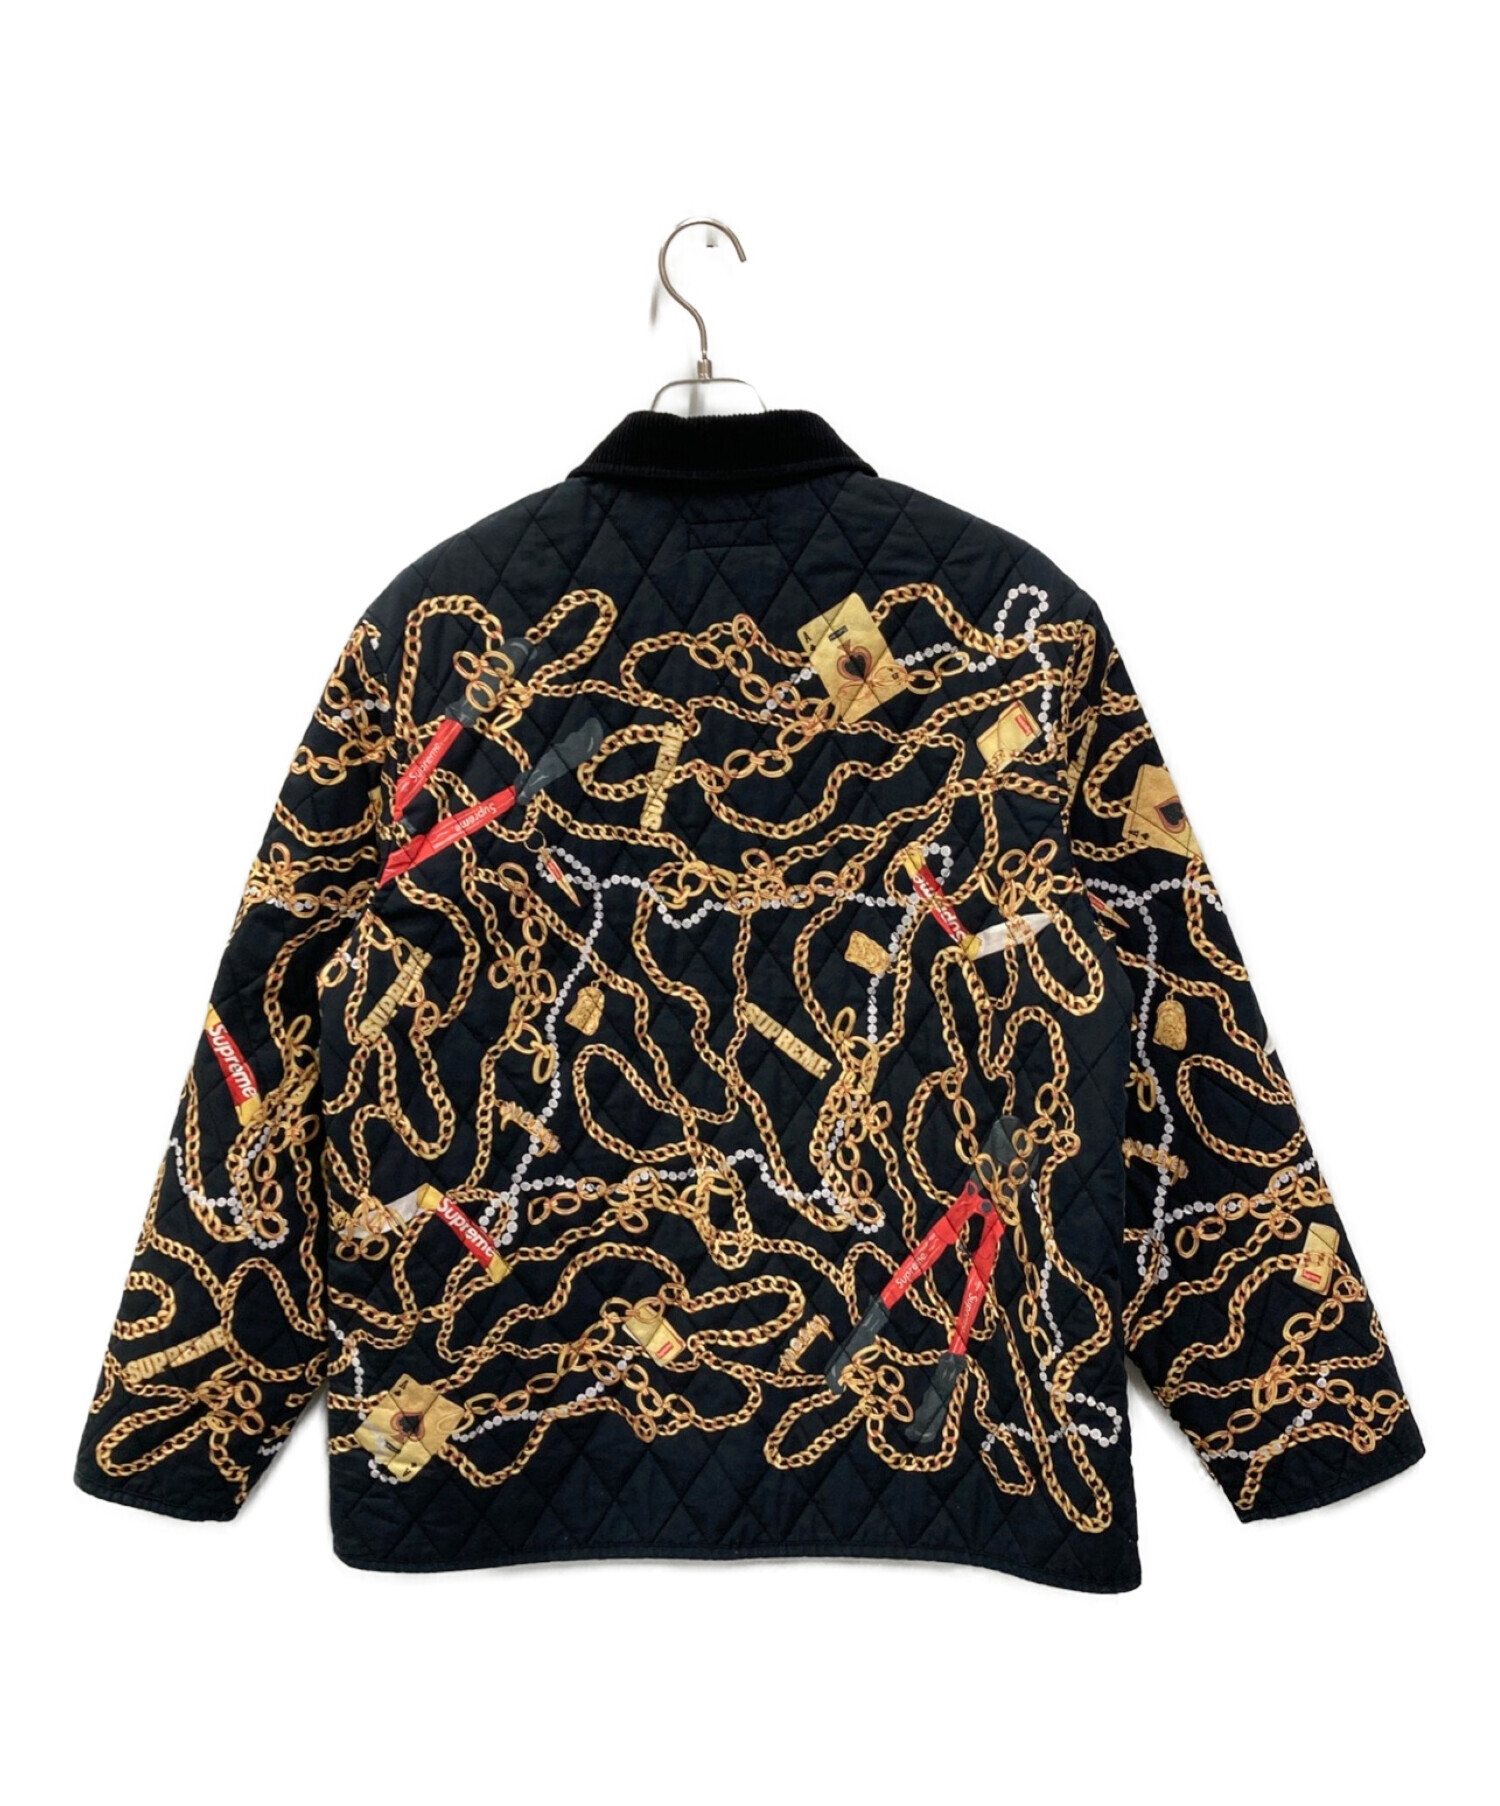 Supreme Chains Quilted Jacket業務クリーニング済み